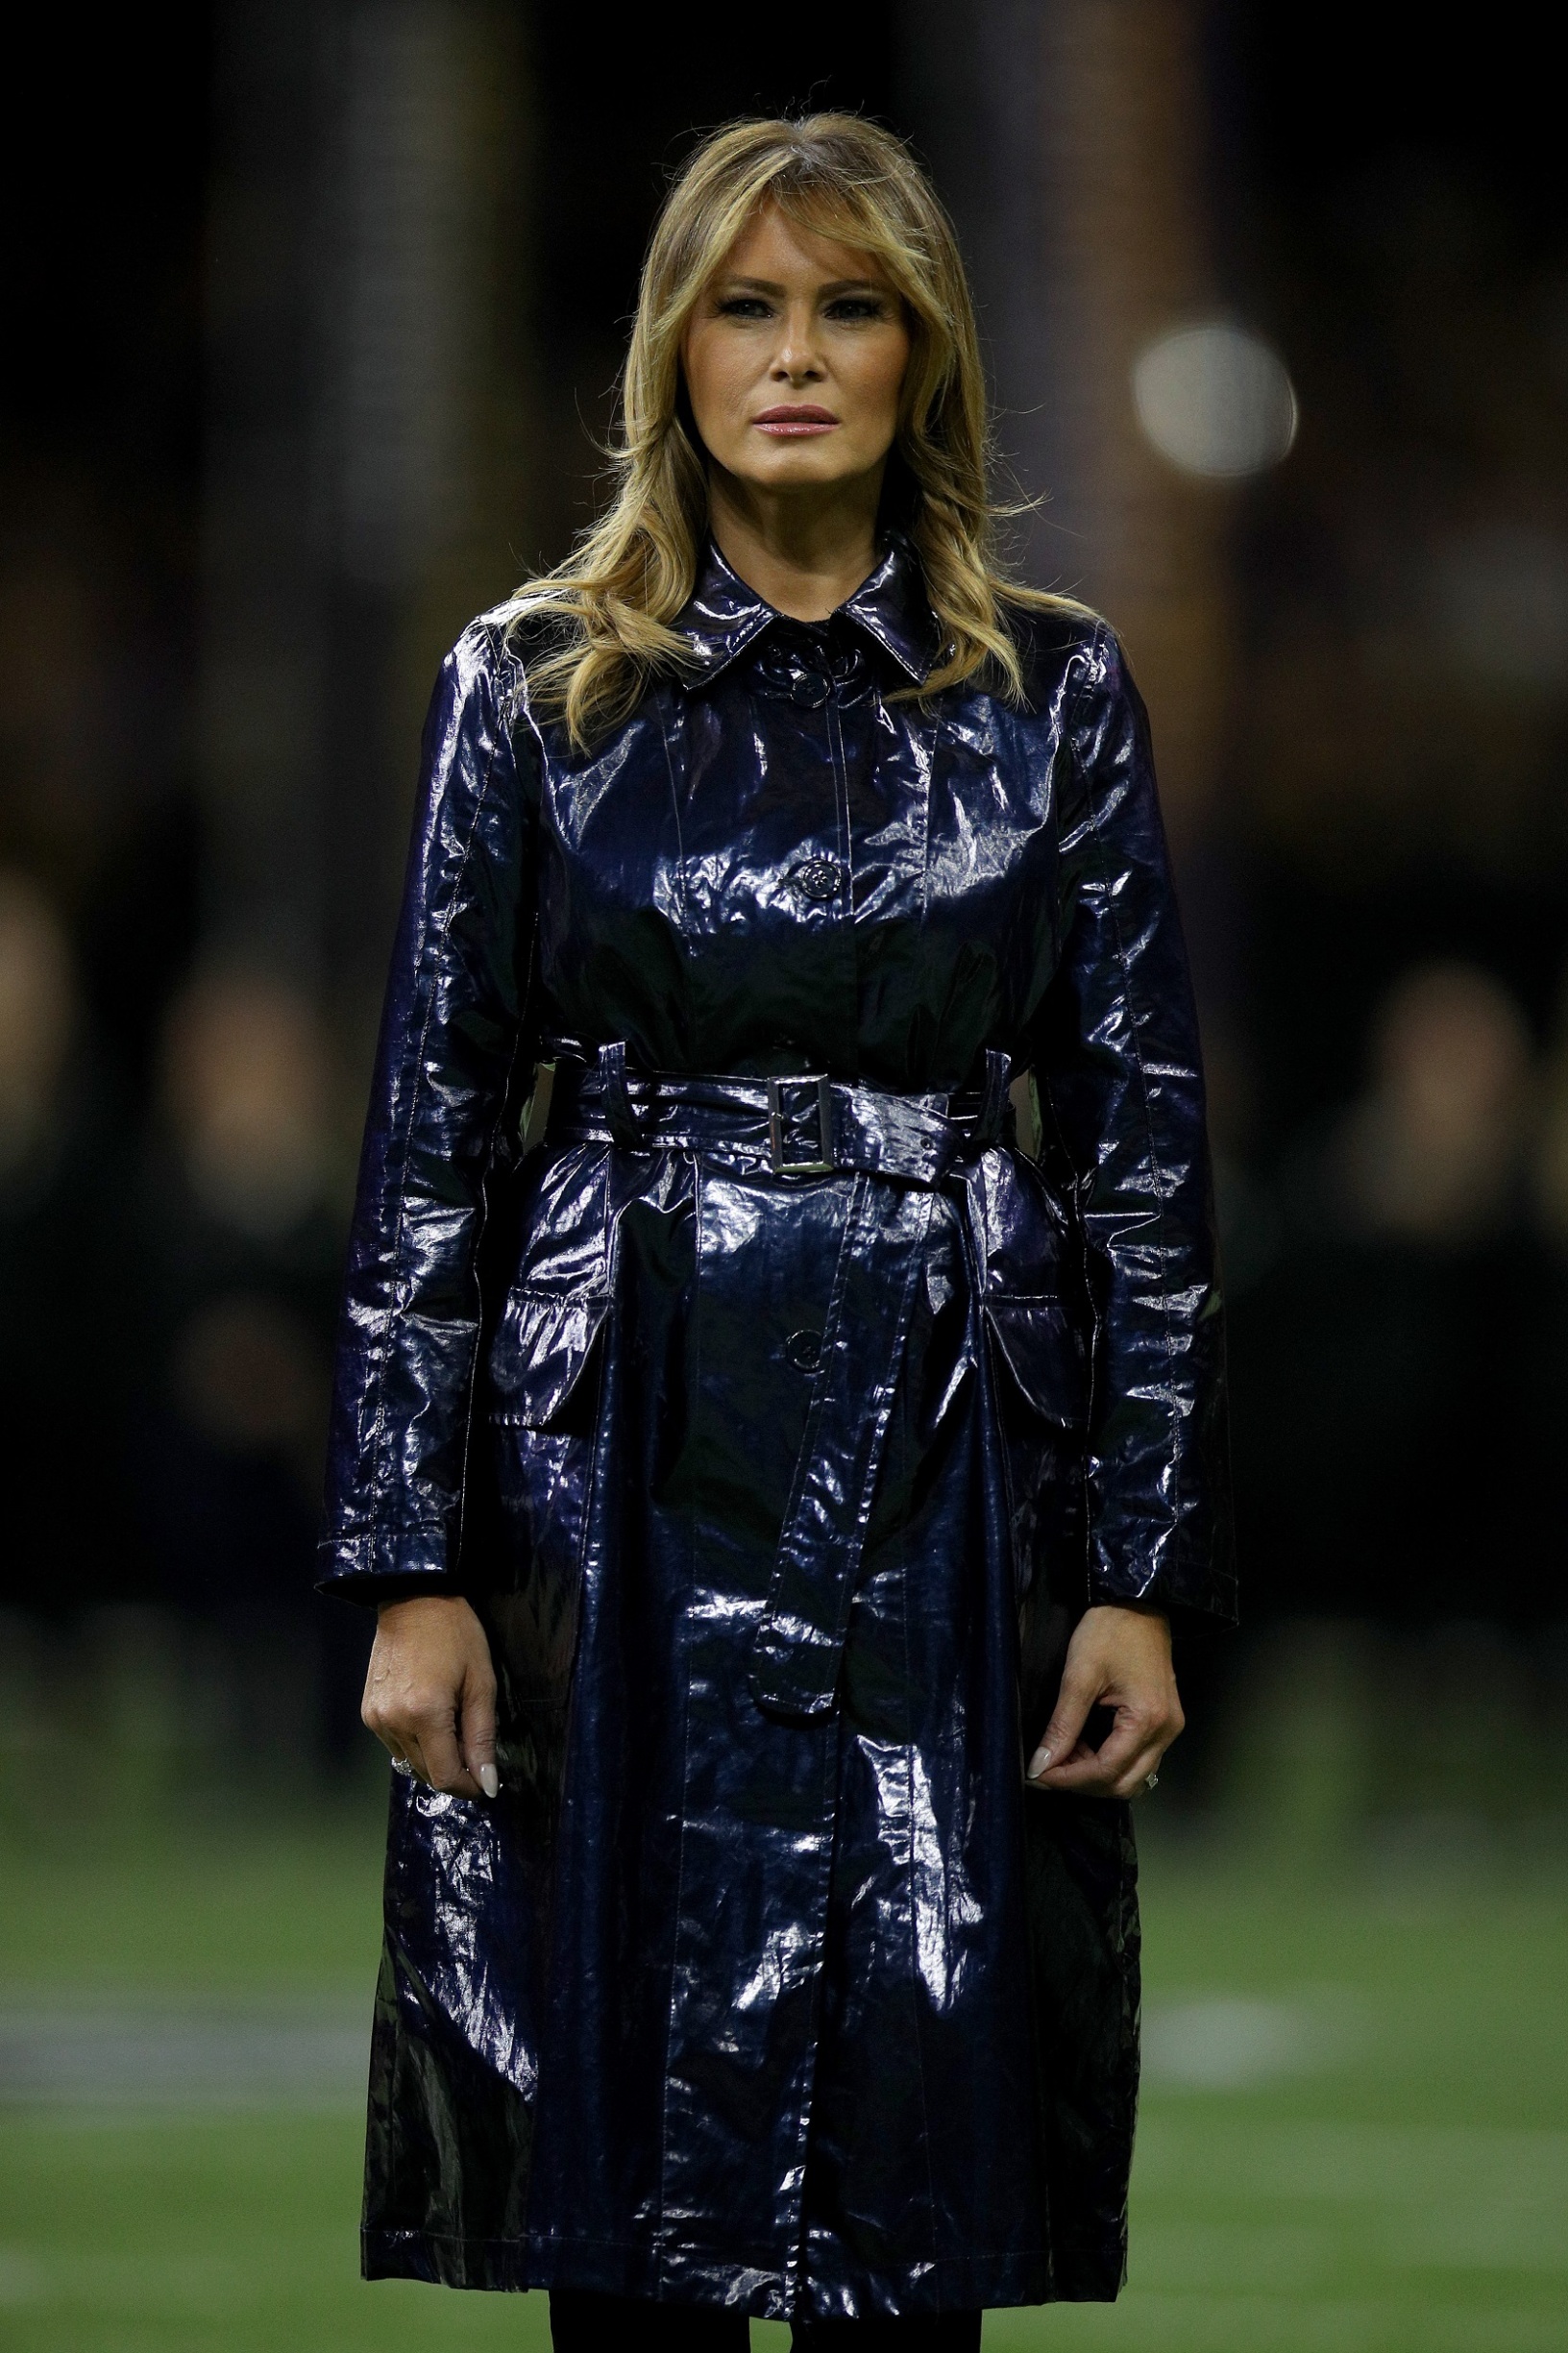 NEW ORLEANS, LOUISIANA - JANUARY 13: First Lady Melania Trump waves prior to the College Football Playoff National Championship game between the Clemson Tigers and the LSU Tigers at Mercedes Benz Superdome on January 13, 2020 in New Orleans, Louisiana. (Photo by Chris Graythen/Getty Images)